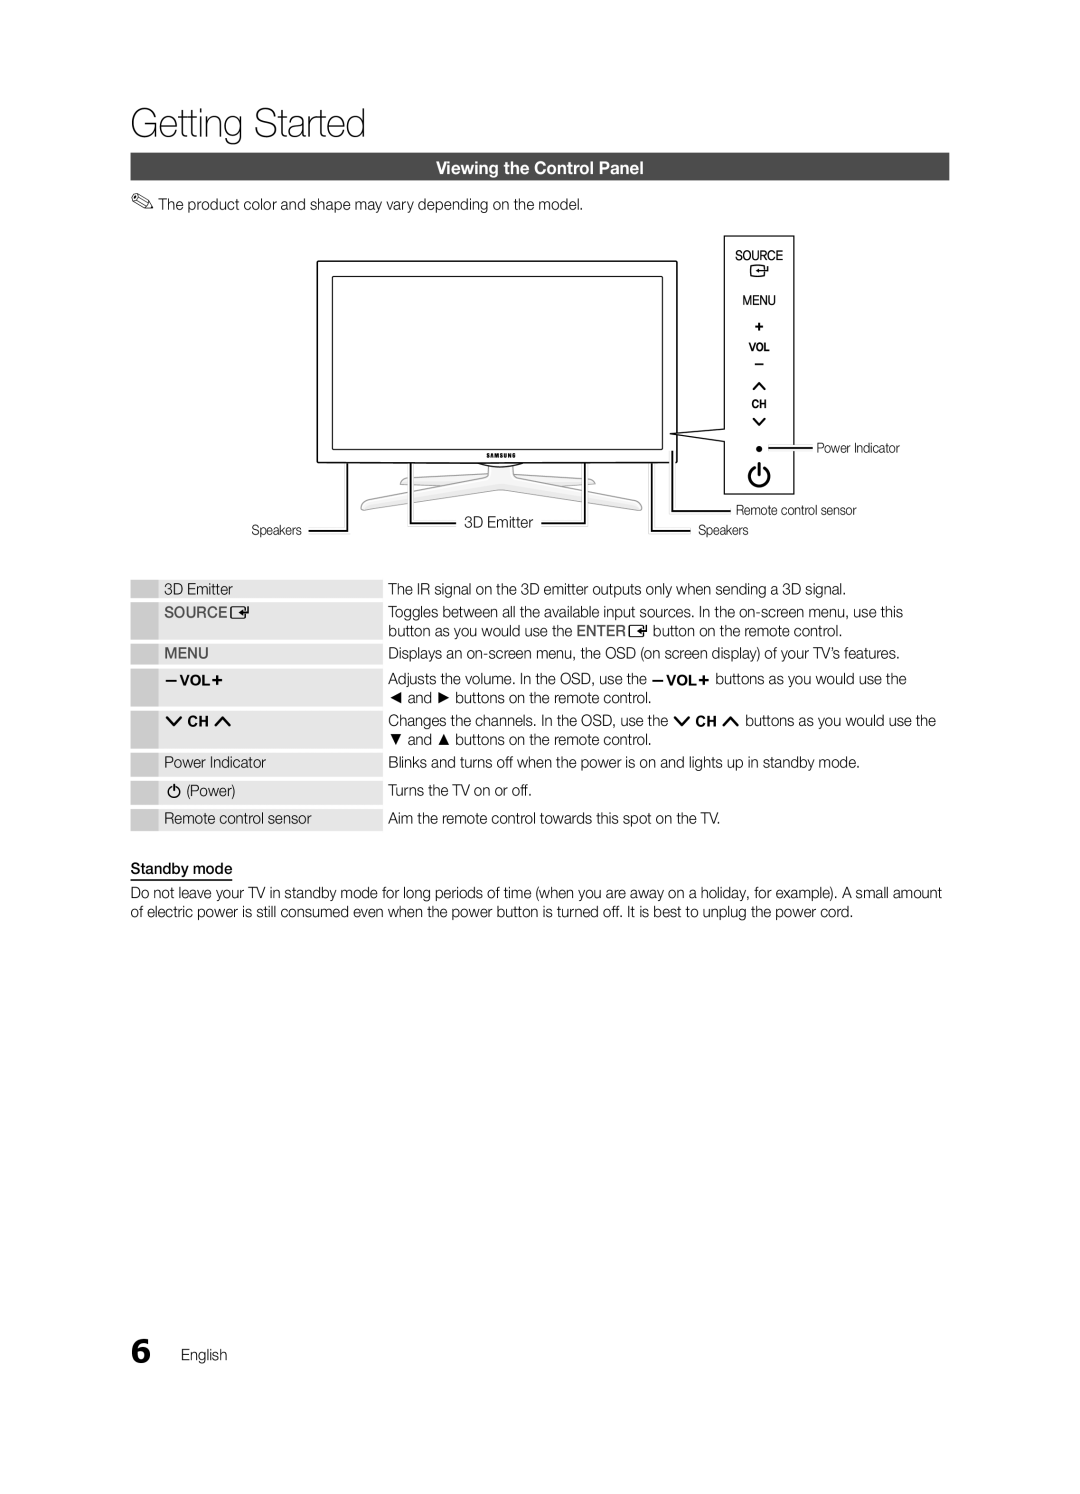 Samsung BN68-03114A-01, PC490-ZA user manual Viewing the Control Panel, Sourcee Menu, Getting Started 